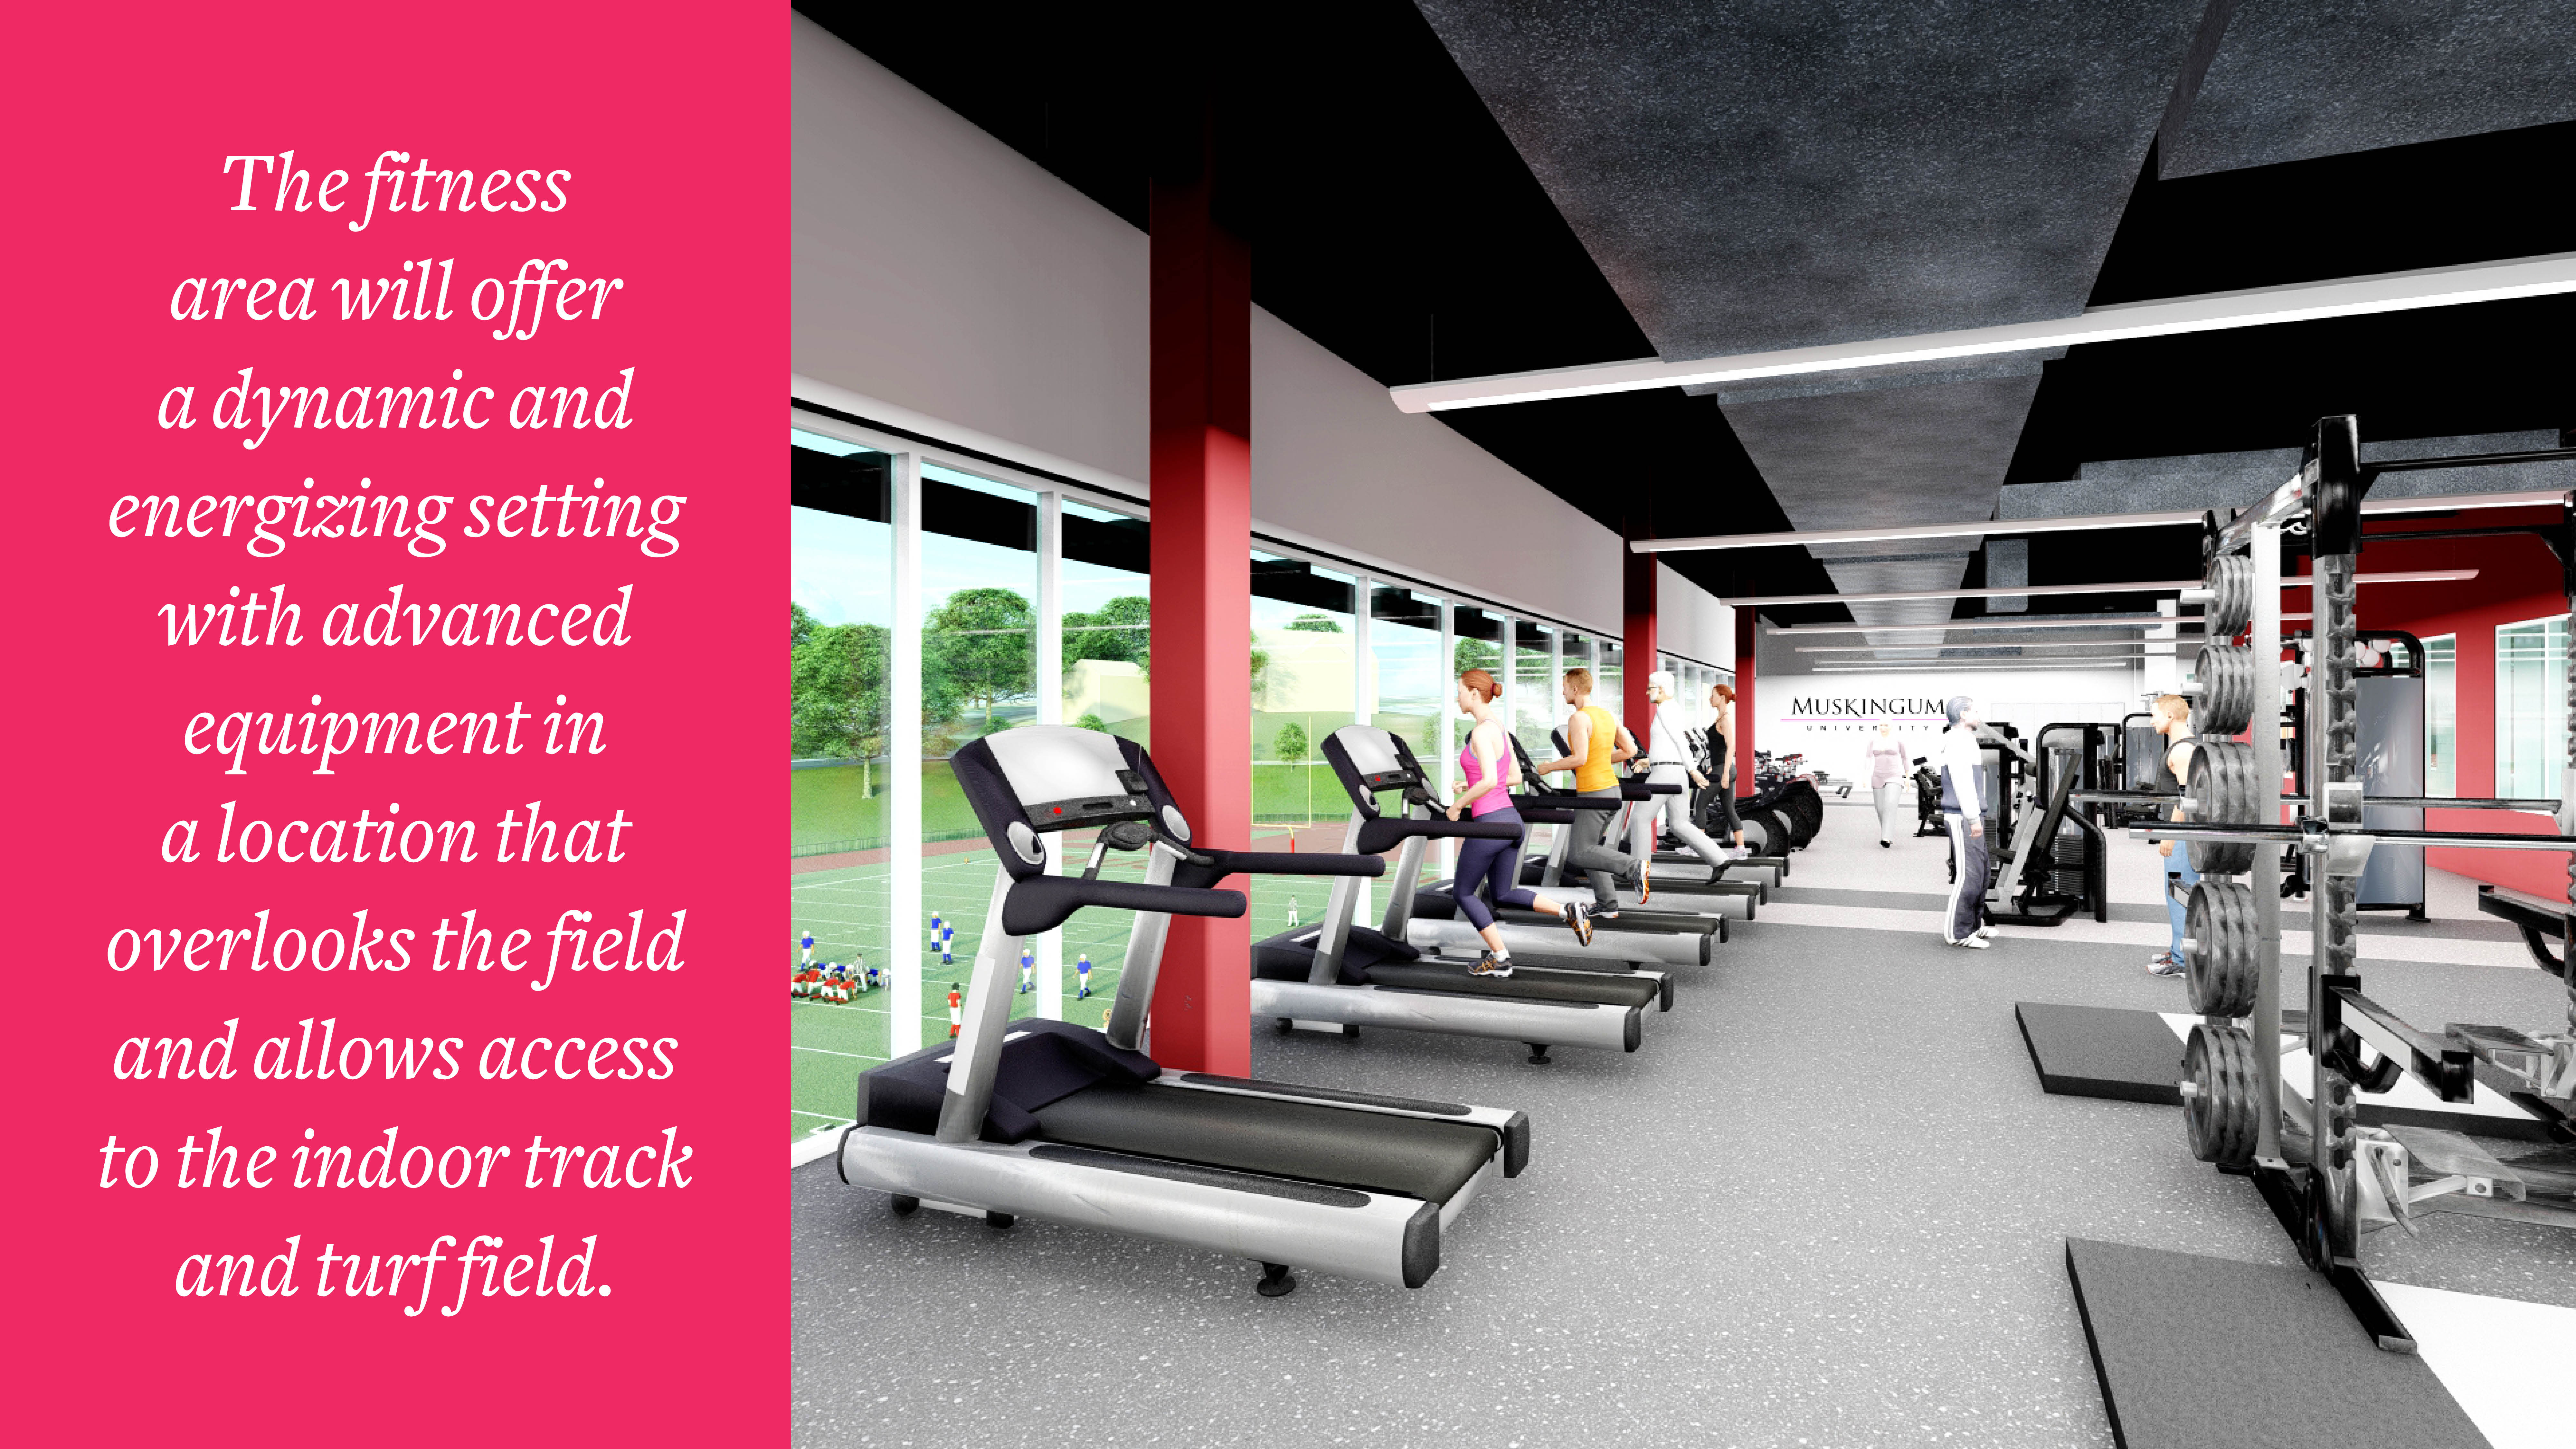 inside rendering of the fitness center with workout equipment and a wall of windows overlooking the outdoor football field